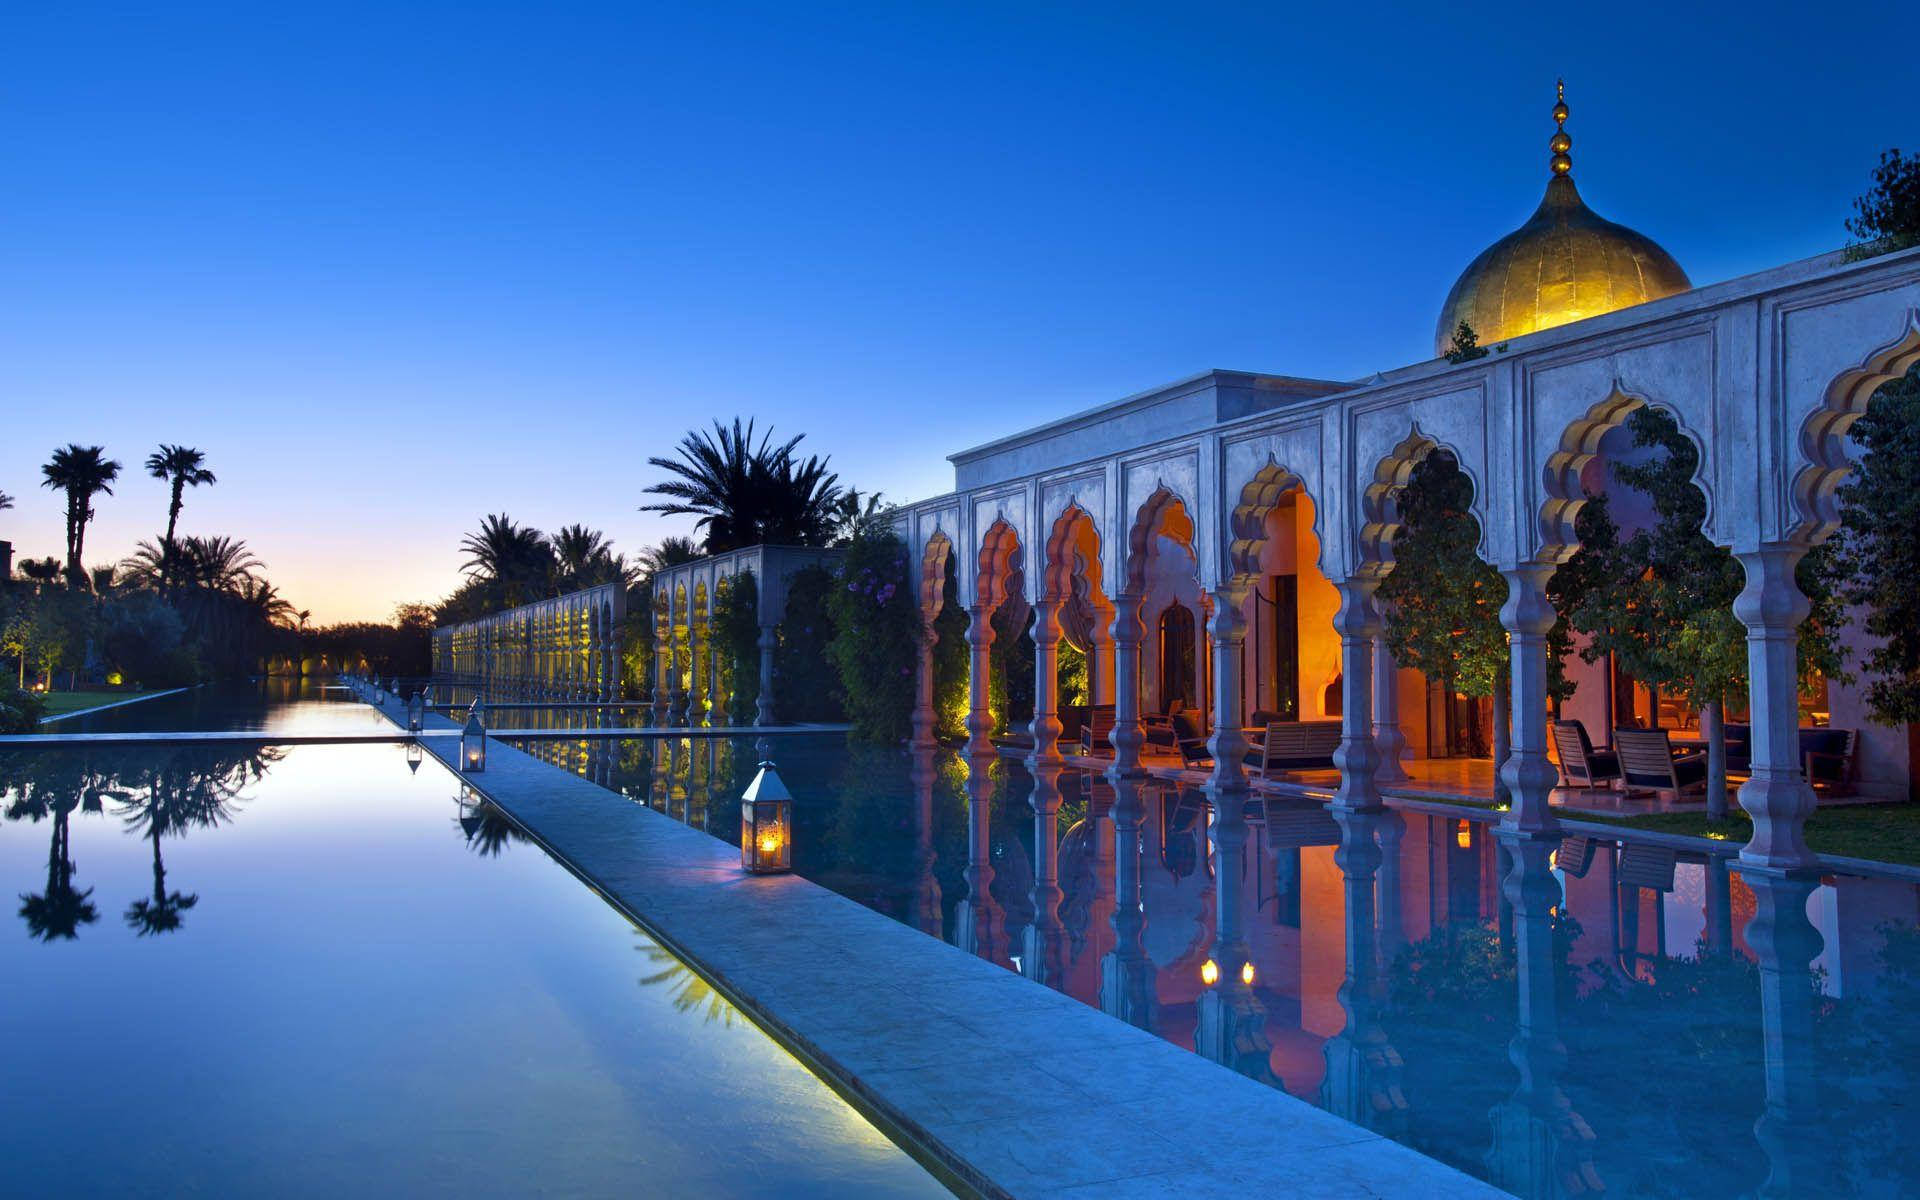 Moroccan Grand Expedition: 10 Days of Culture and Adventure